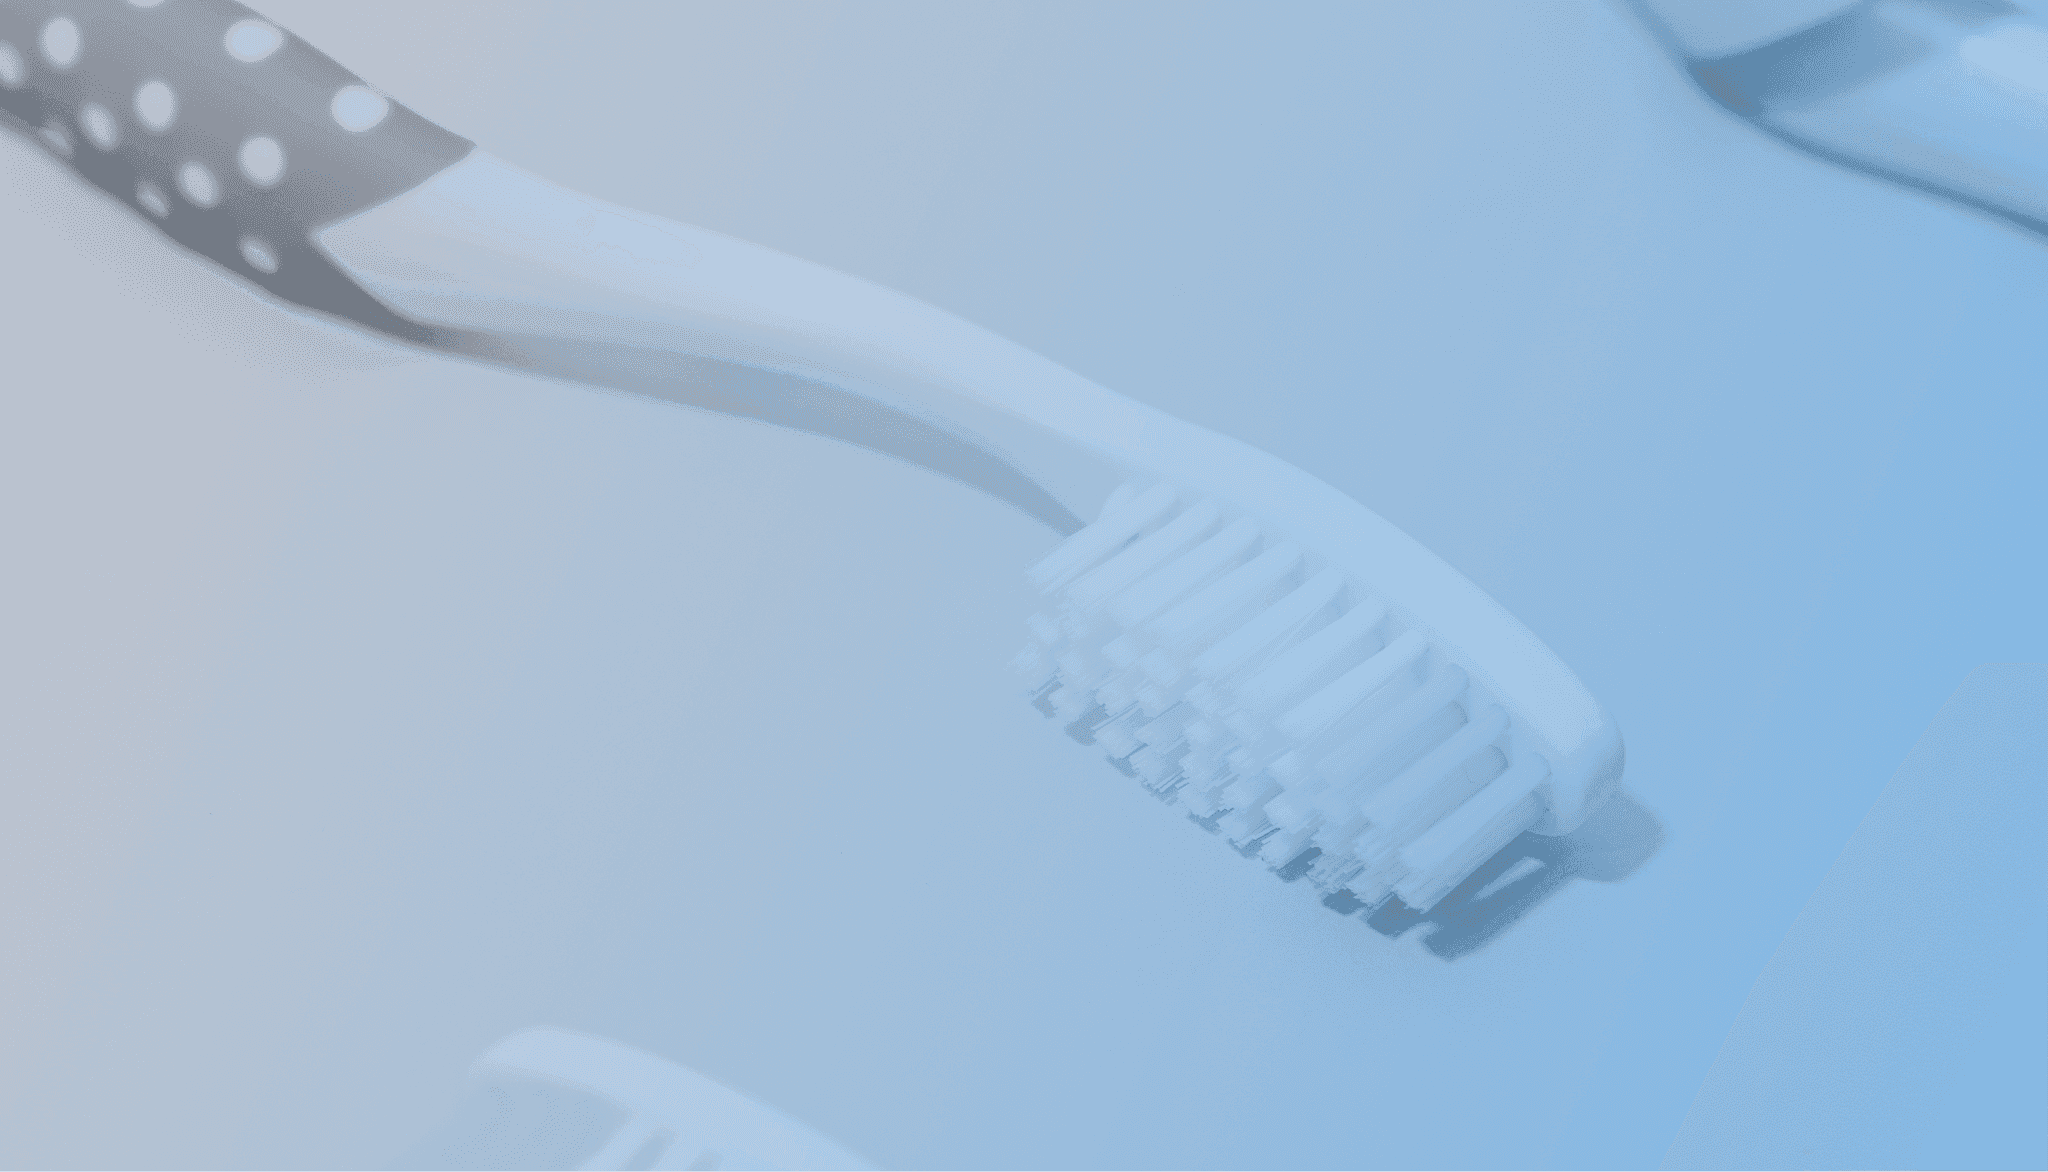 A toothbrush displayed at a slanted angle